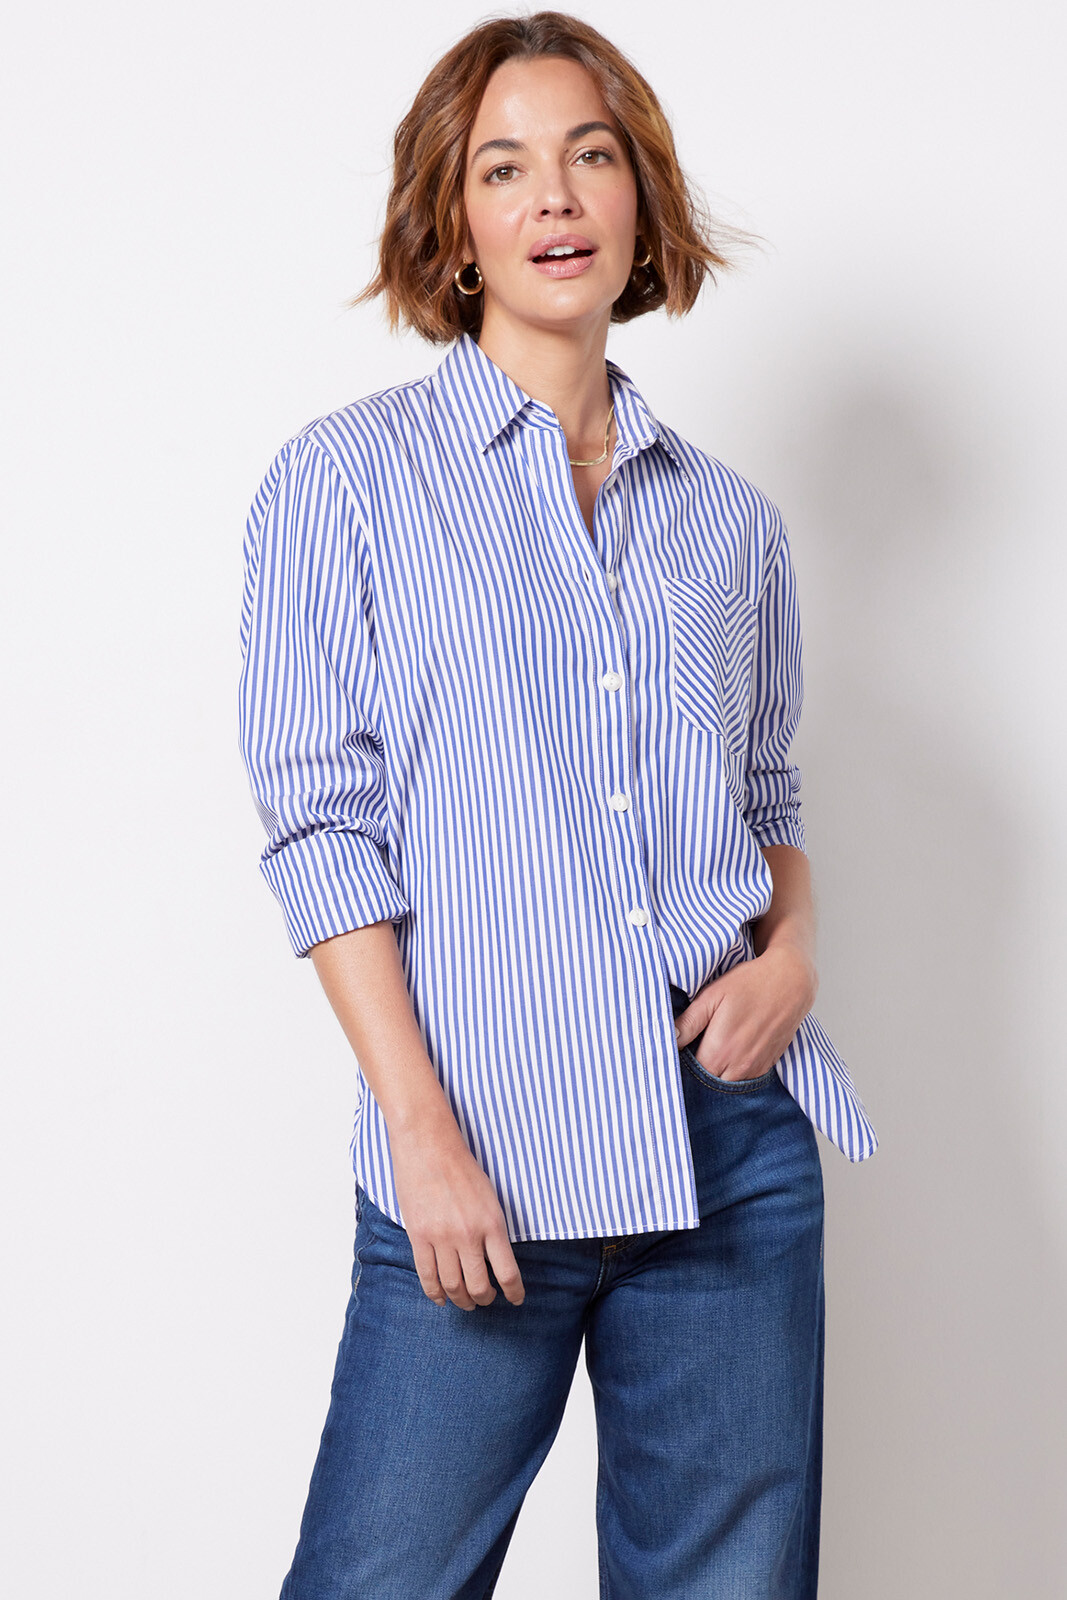 Eden & Olivia Shirt Women Small Chest Pocket Button Up Tie Front Striped